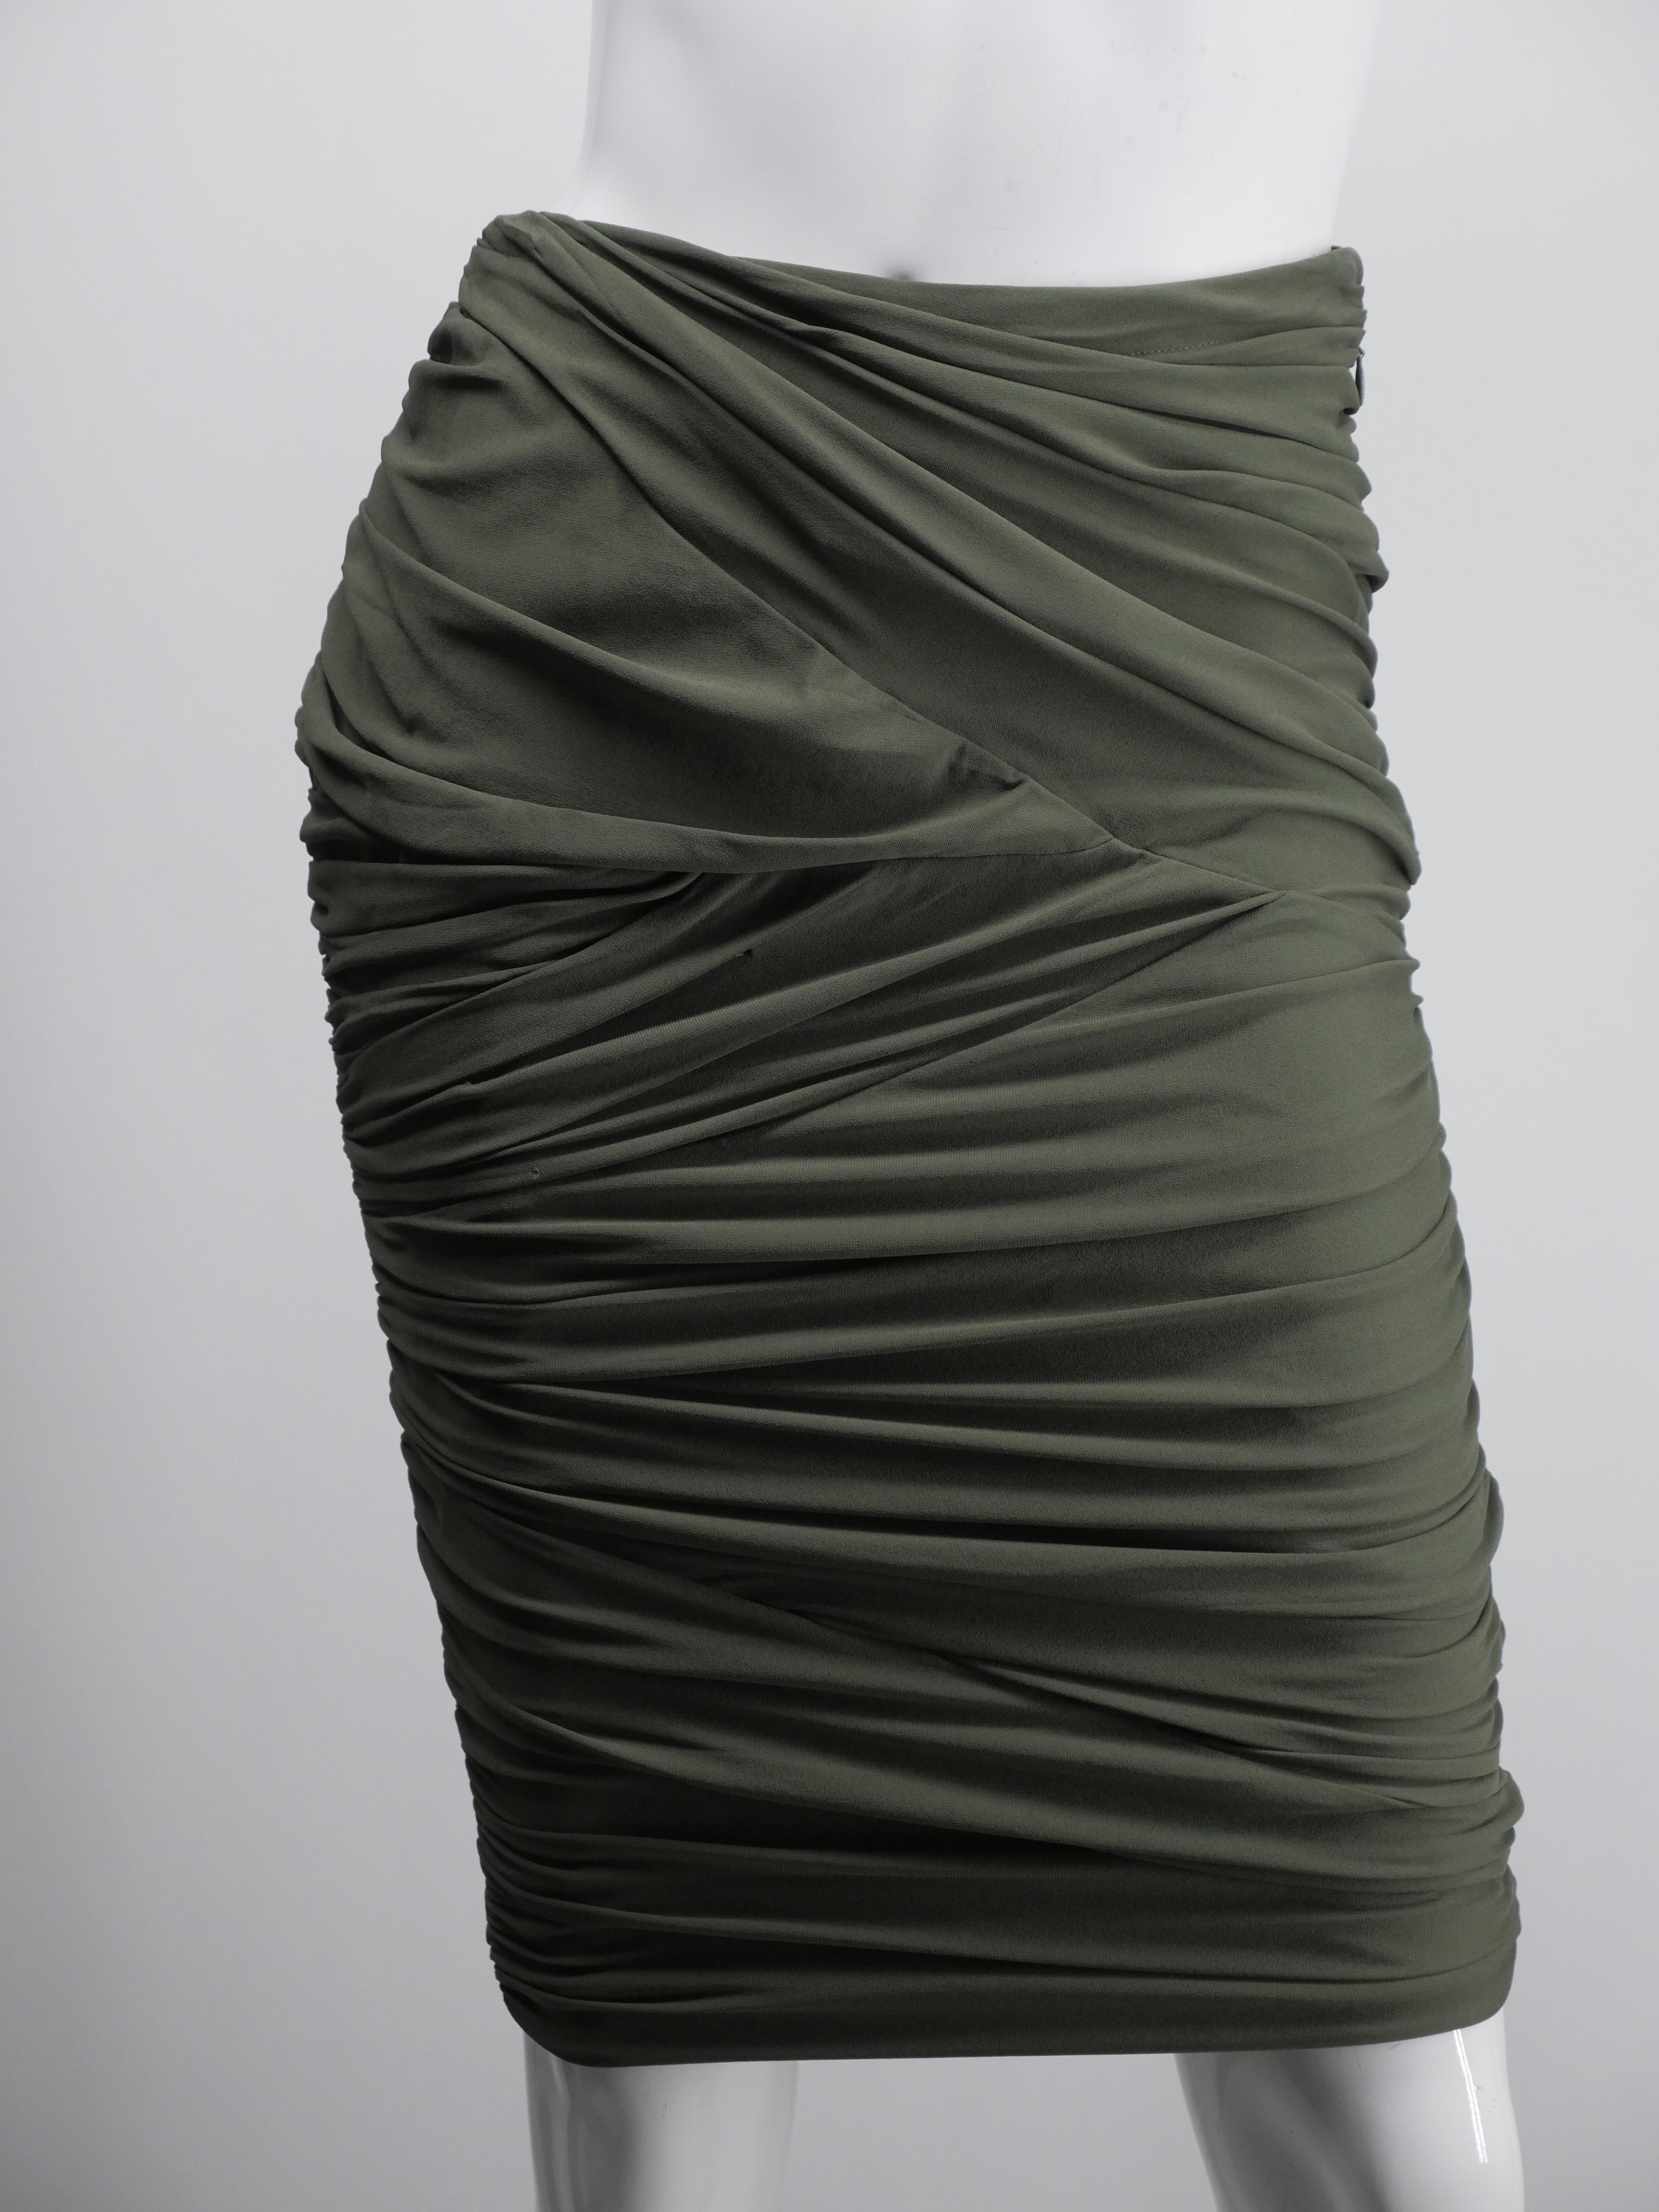 New with Tags knee length side zipper Olive Green Ruched skirt